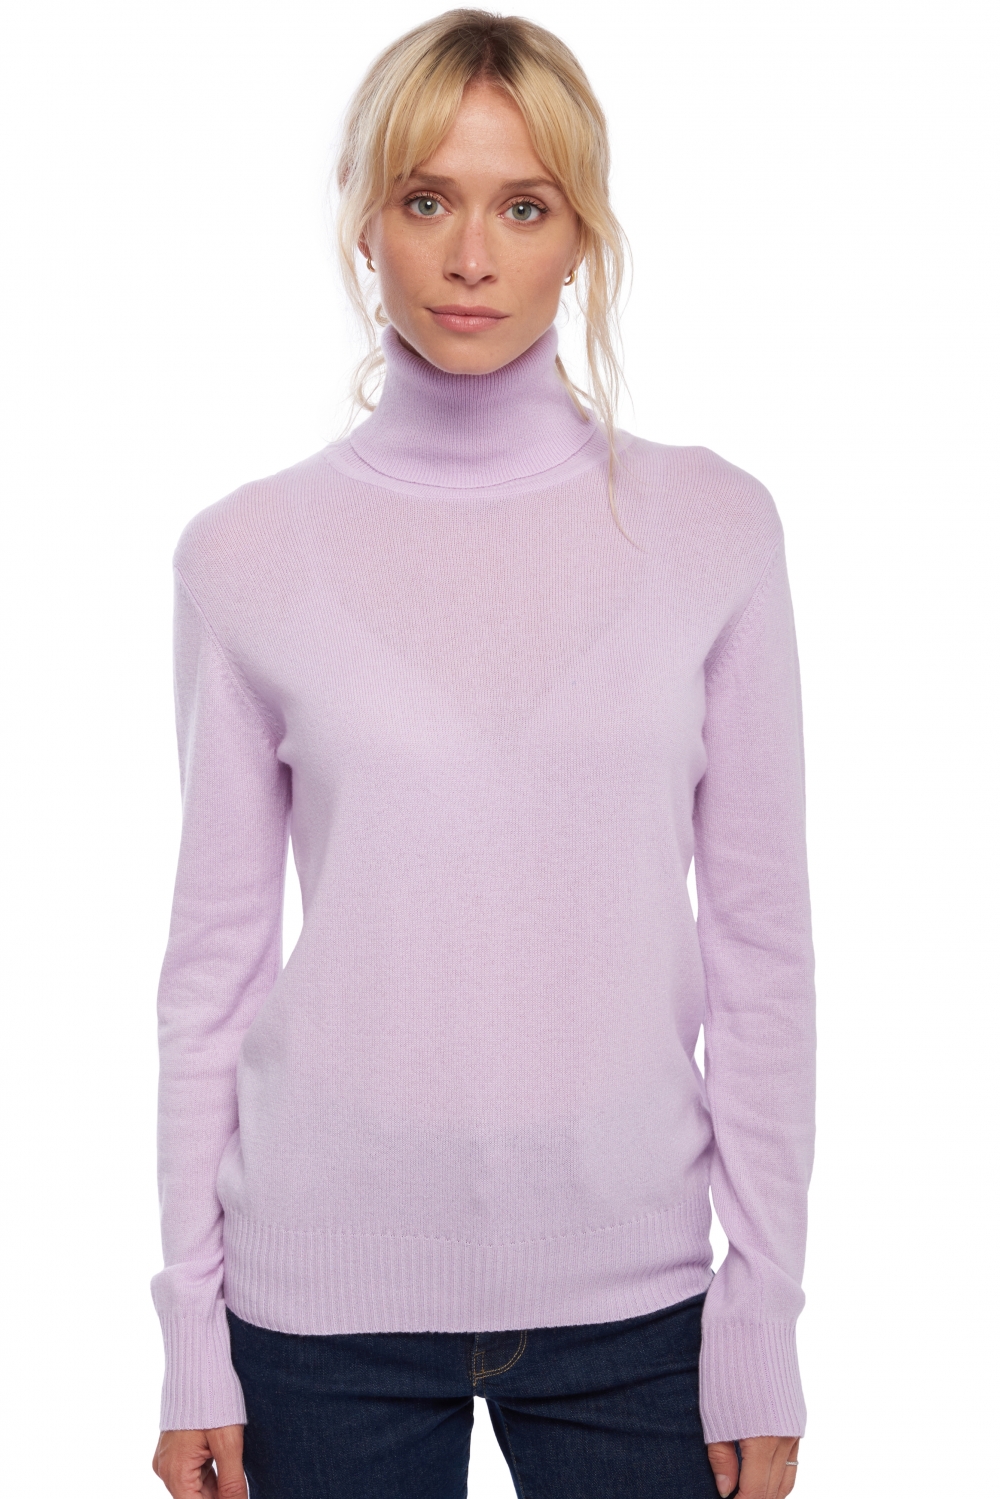 Cachemire pull femme col roule lili lilas xs